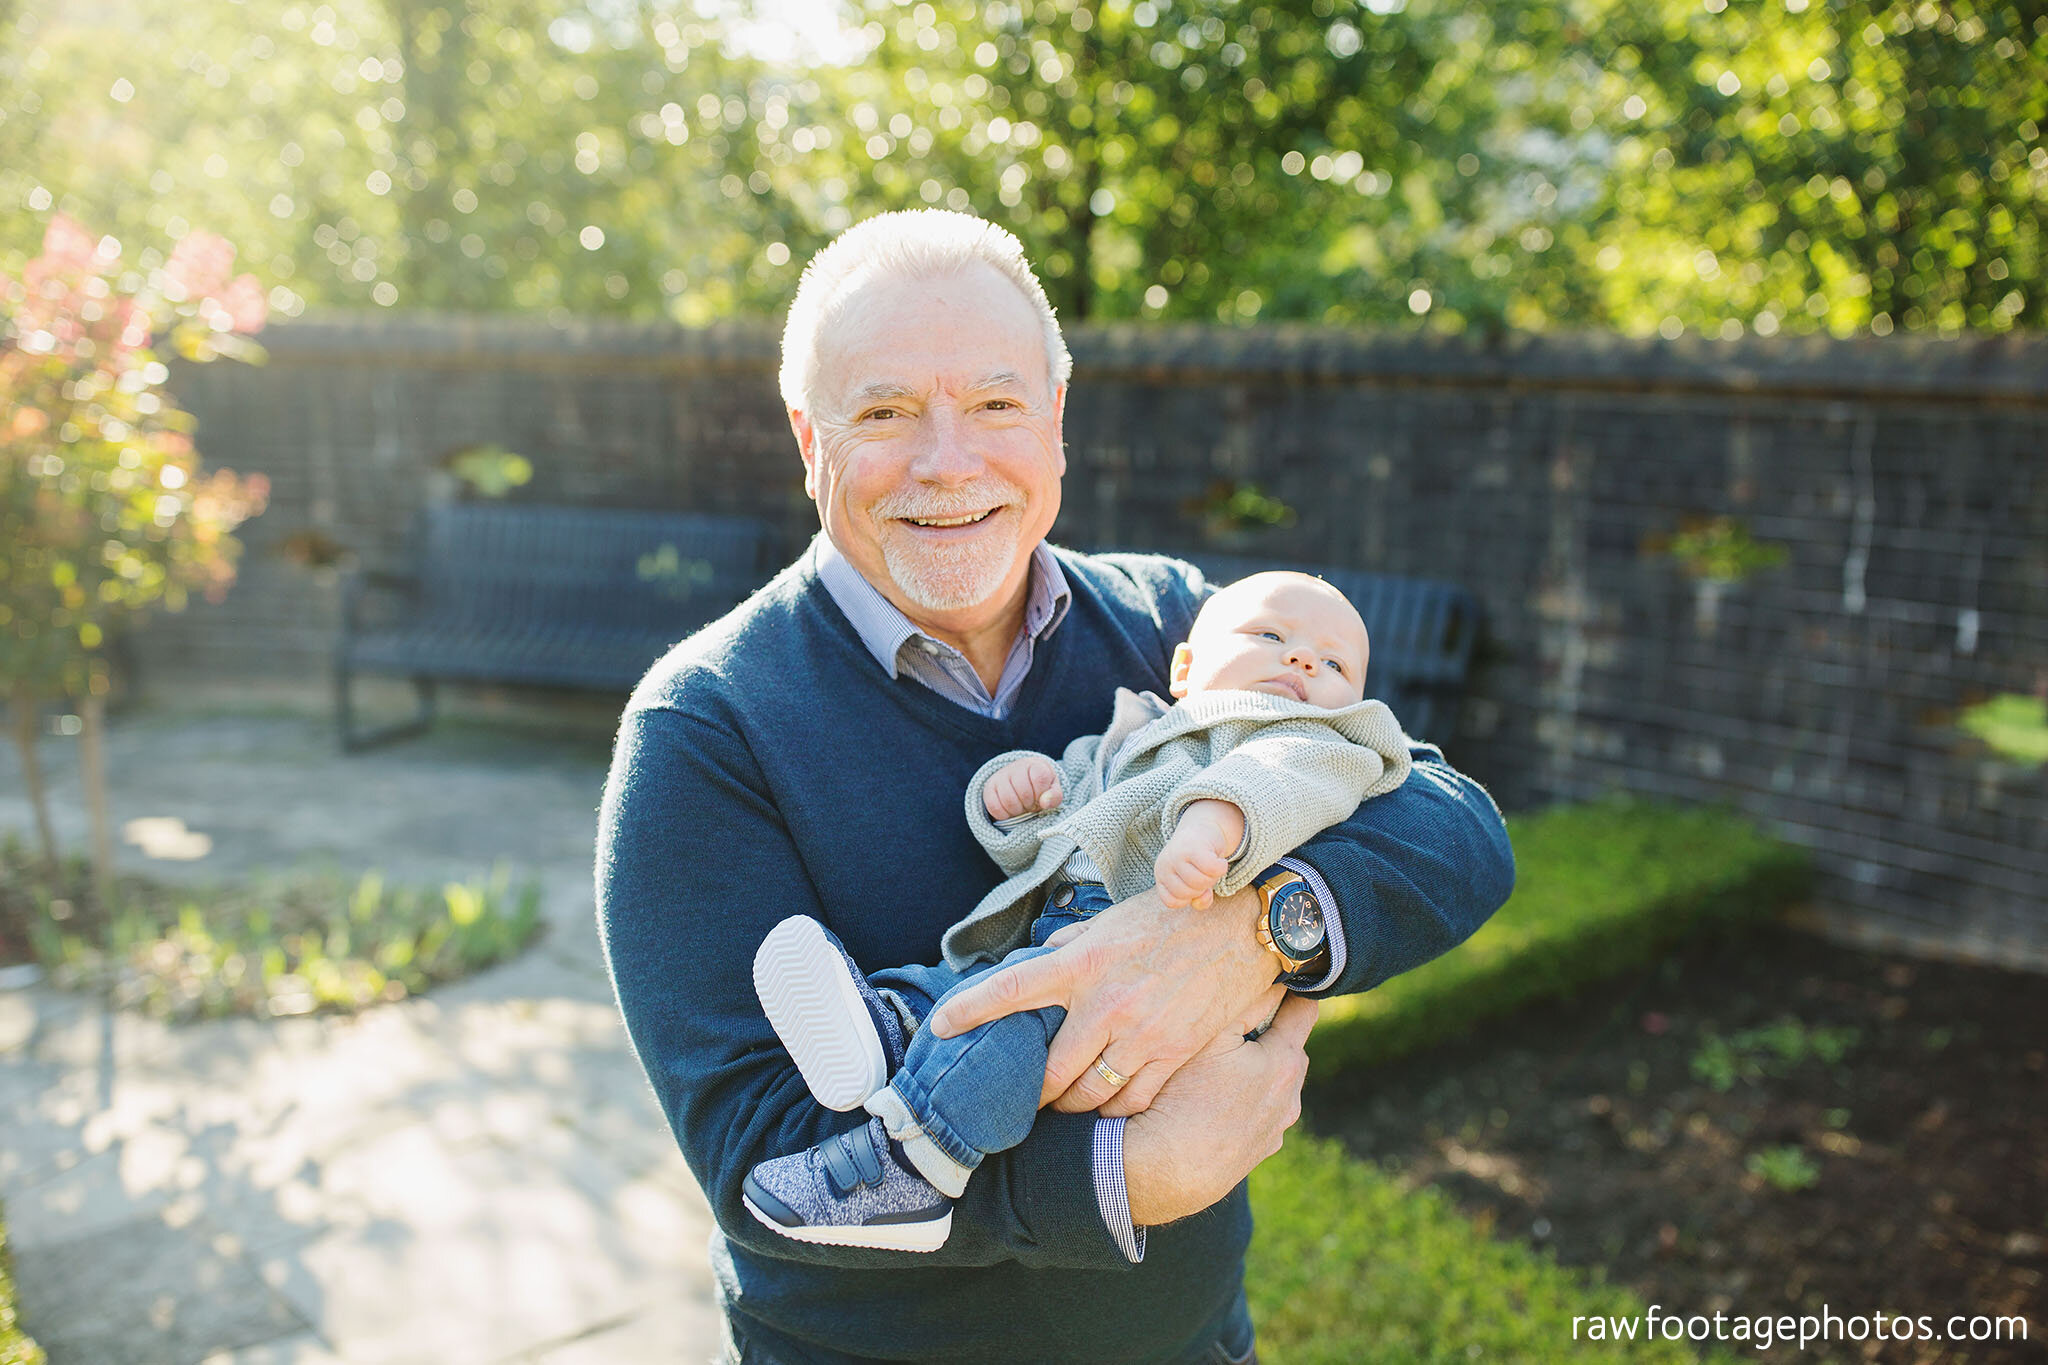 raw_footage_photography-london_ontario_family_photographer-fall_extended_family_session-grandparents-006.jpg